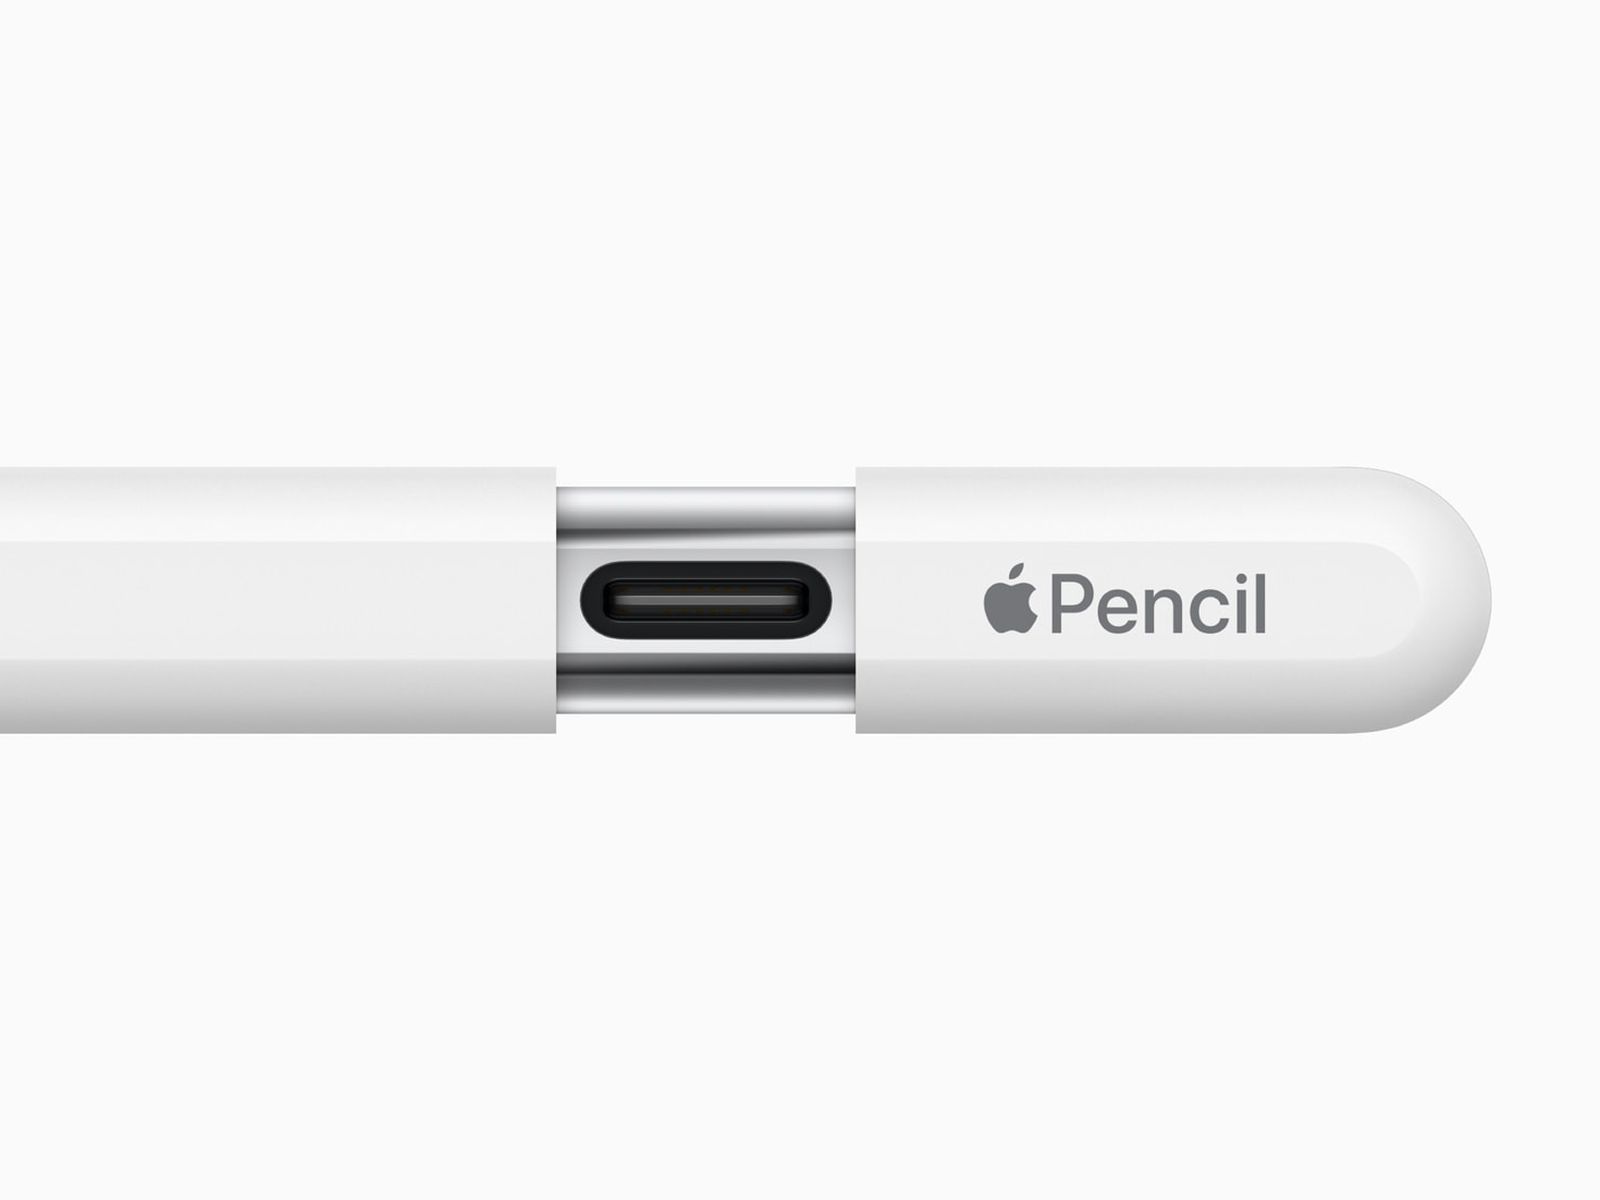 Apple Patents Apple Pencil That Can Sample Colors From Real-World Surfaces  - MacRumors